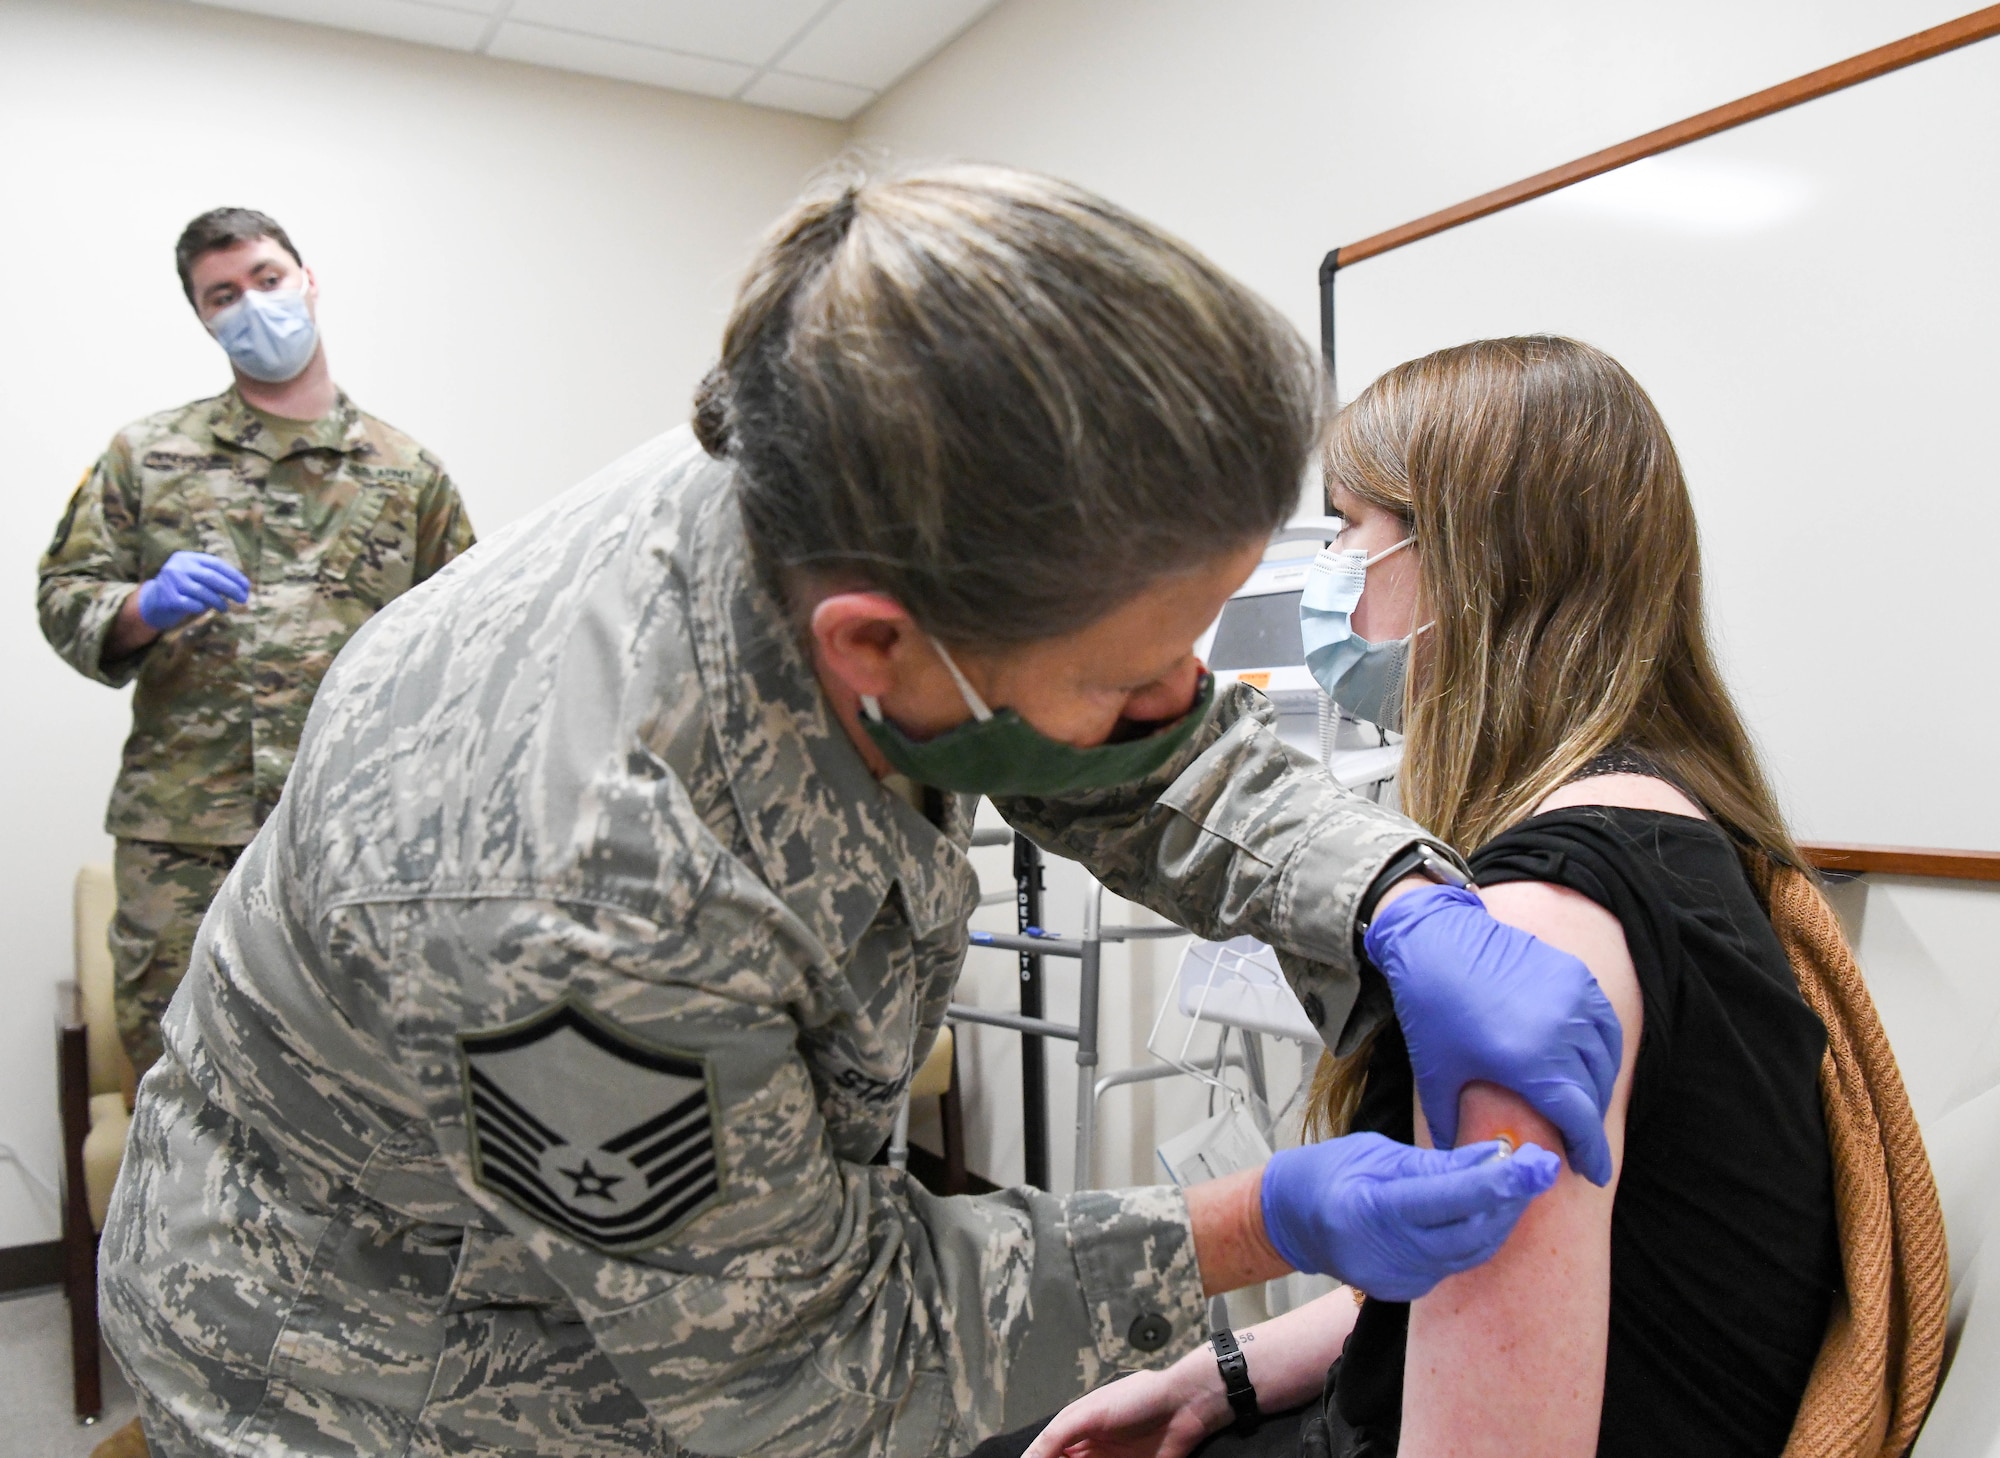 Master Sgt. Marti Stanley with the Tennessee Air National Guard gives a COVID-19 vaccine to Lauren Arnold, an Arnold Engineering Development Complex team member, at Arnold Air Force Base, Tenn., Feb. 23, 2021, at the Medical Aid Station on base. Stanley and Sgt. Dillon Henderson, a member of the Tennessee Army National Guard, administered the vaccines as part of their duties on the COVID Joint Task Force. (U.S. Air Force photo by Jill Pickett)